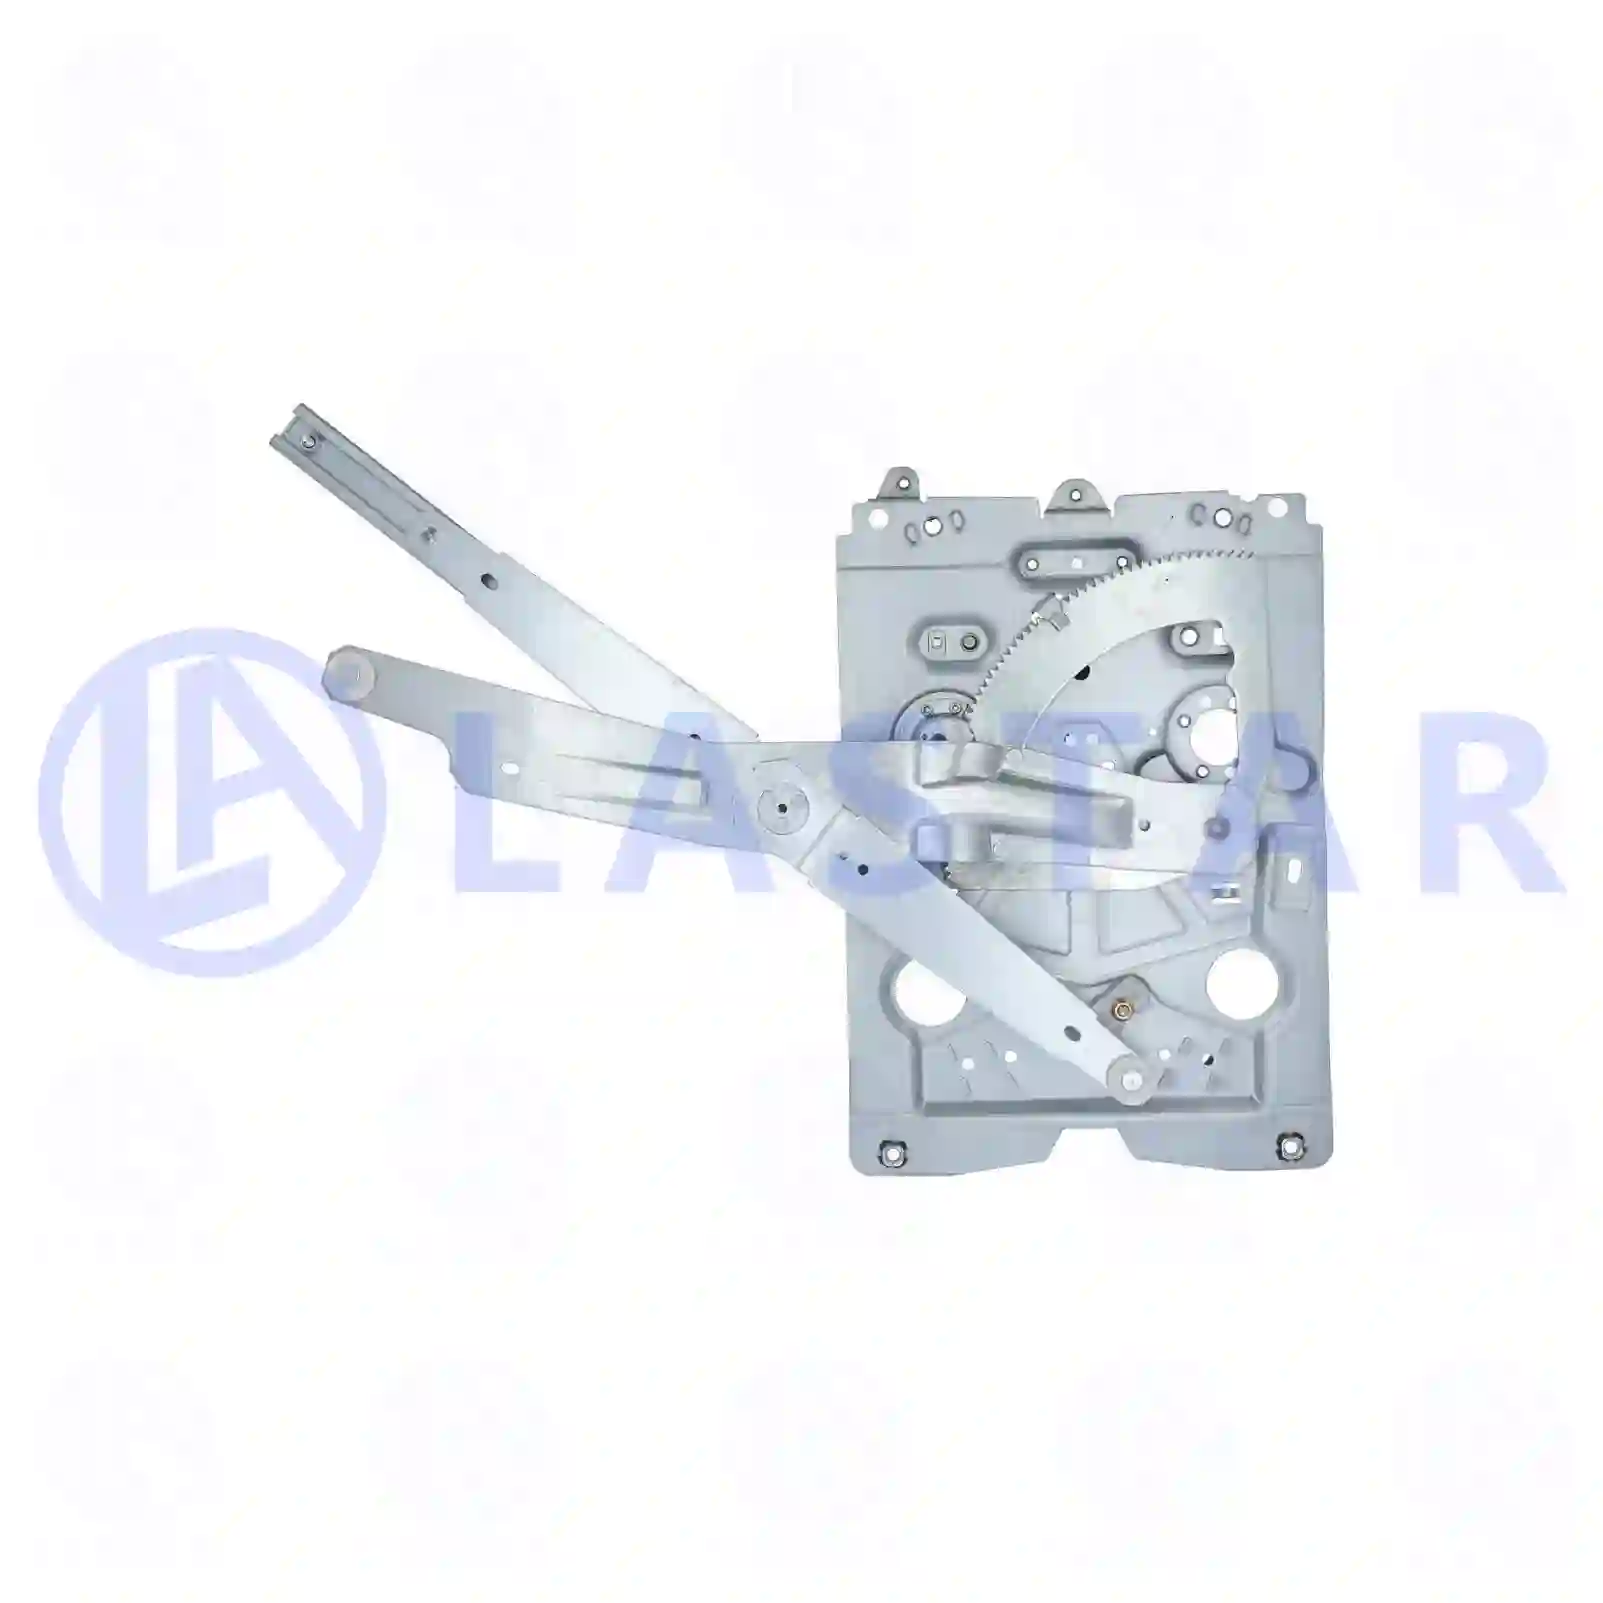 Window regulator, right, electrical, with motor, 77721195, 3176546, ZG61317-0008, ||  77721195 Lastar Spare Part | Truck Spare Parts, Auotomotive Spare Parts Window regulator, right, electrical, with motor, 77721195, 3176546, ZG61317-0008, ||  77721195 Lastar Spare Part | Truck Spare Parts, Auotomotive Spare Parts